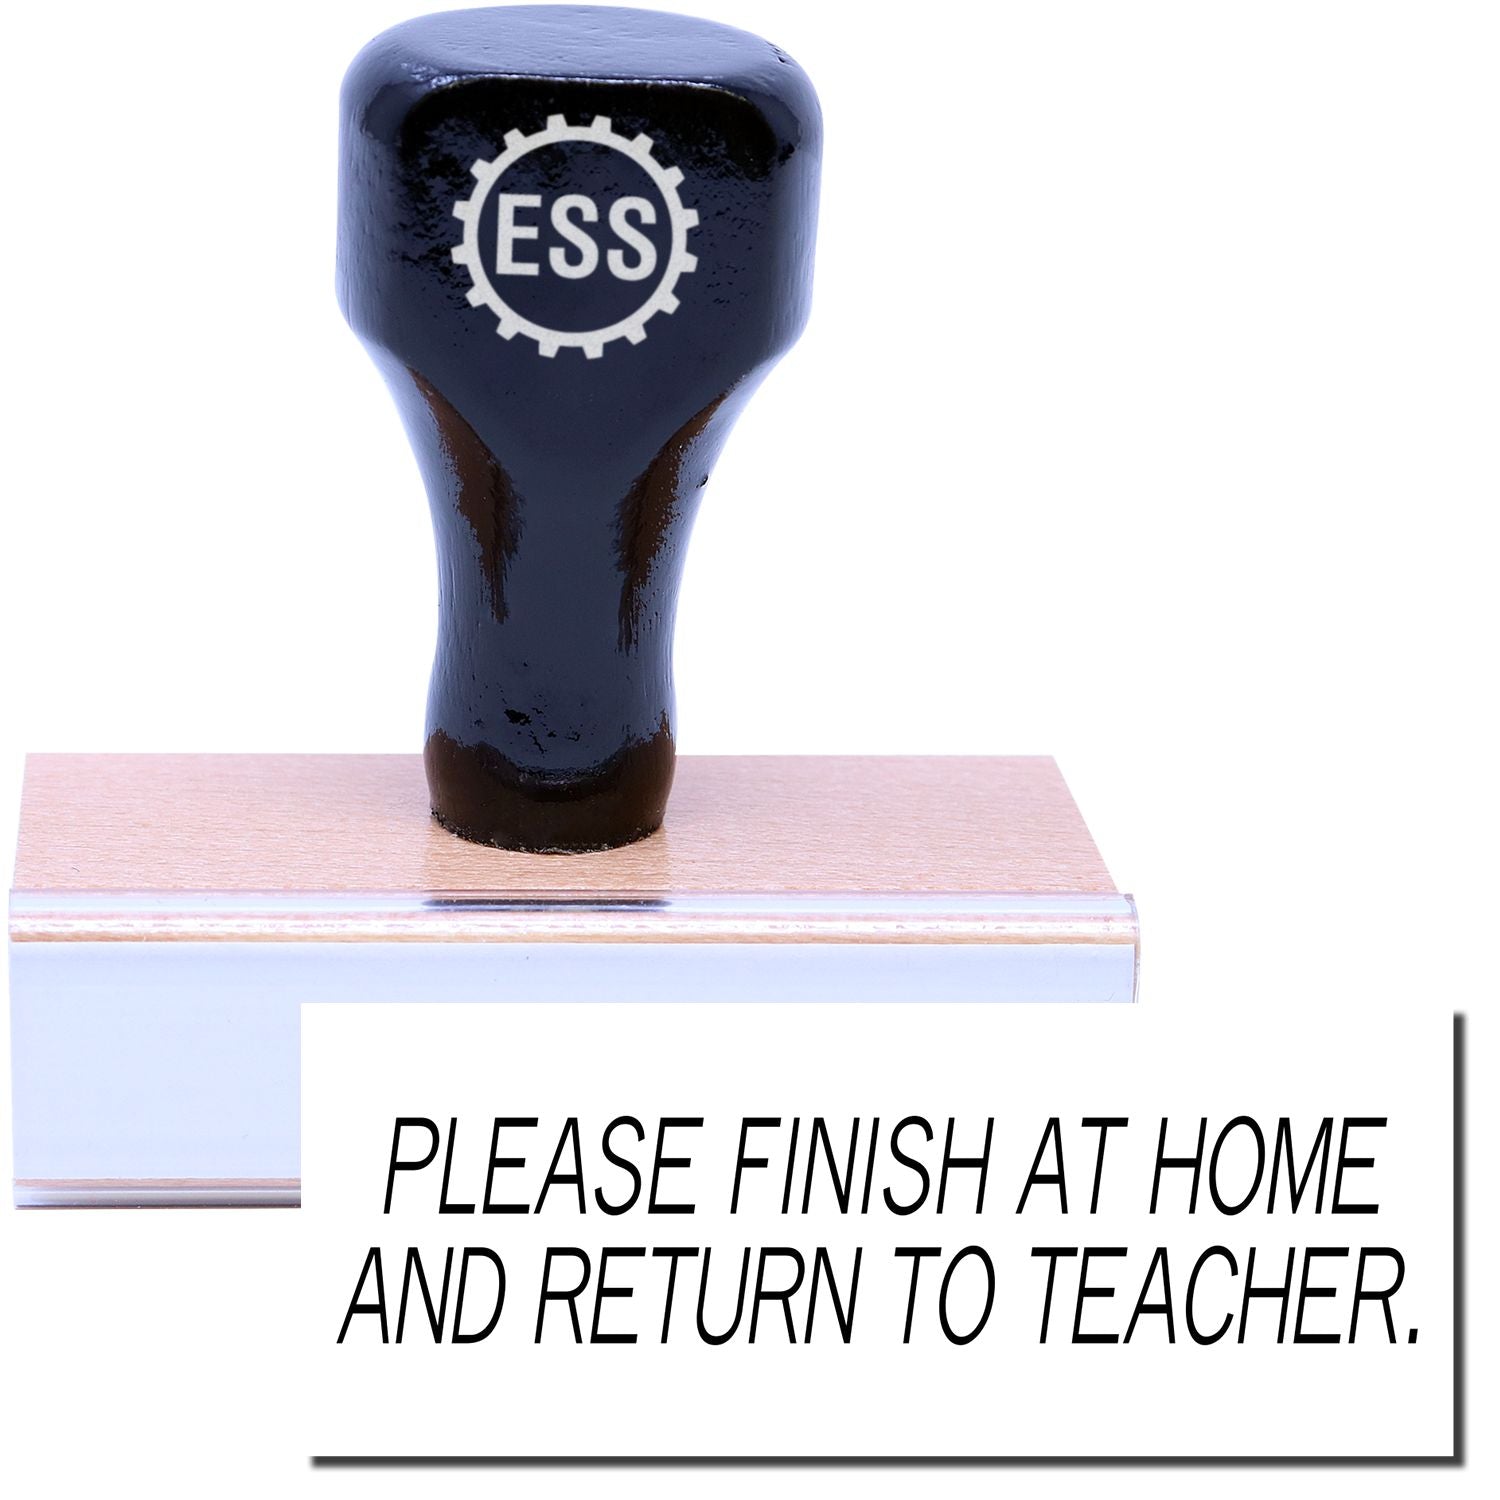 A stock office rubber stamp with a stamped image showing how the text "PLEASE FINISH AT HOME AND RETURN TO TEACHER." in a large font is displayed after stamping.